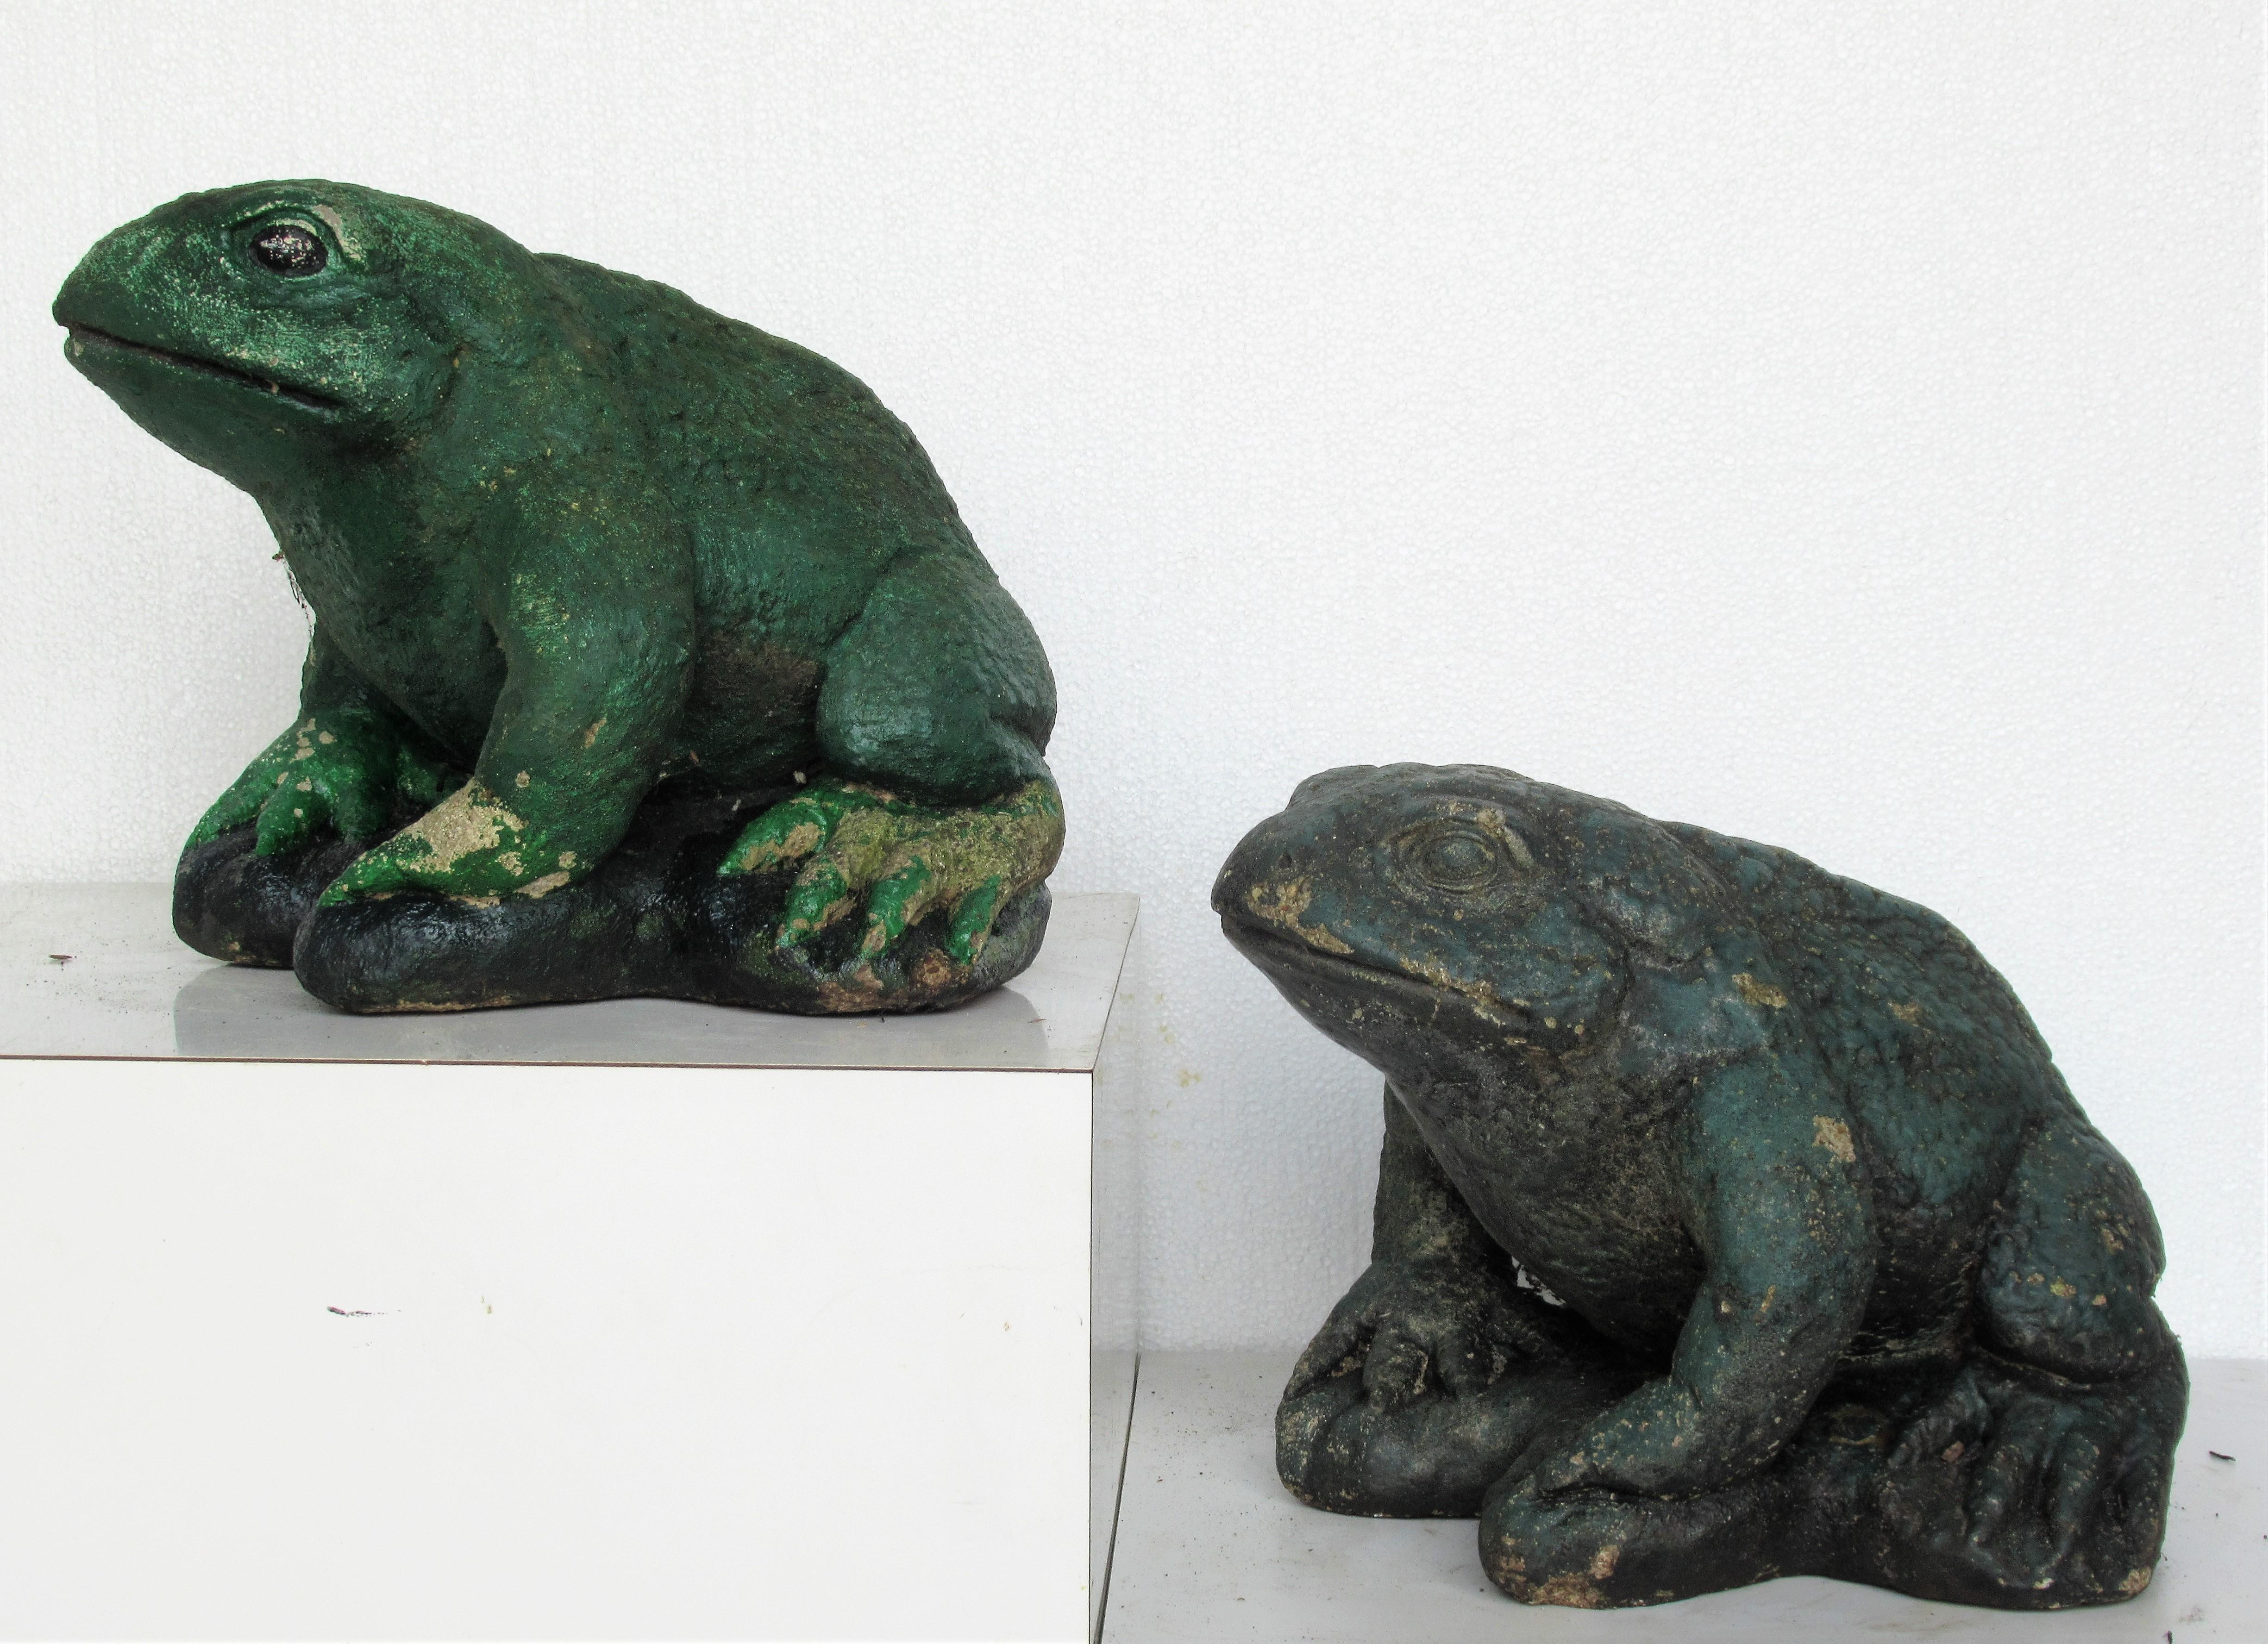  Old Painted Stone Garden Toads 9